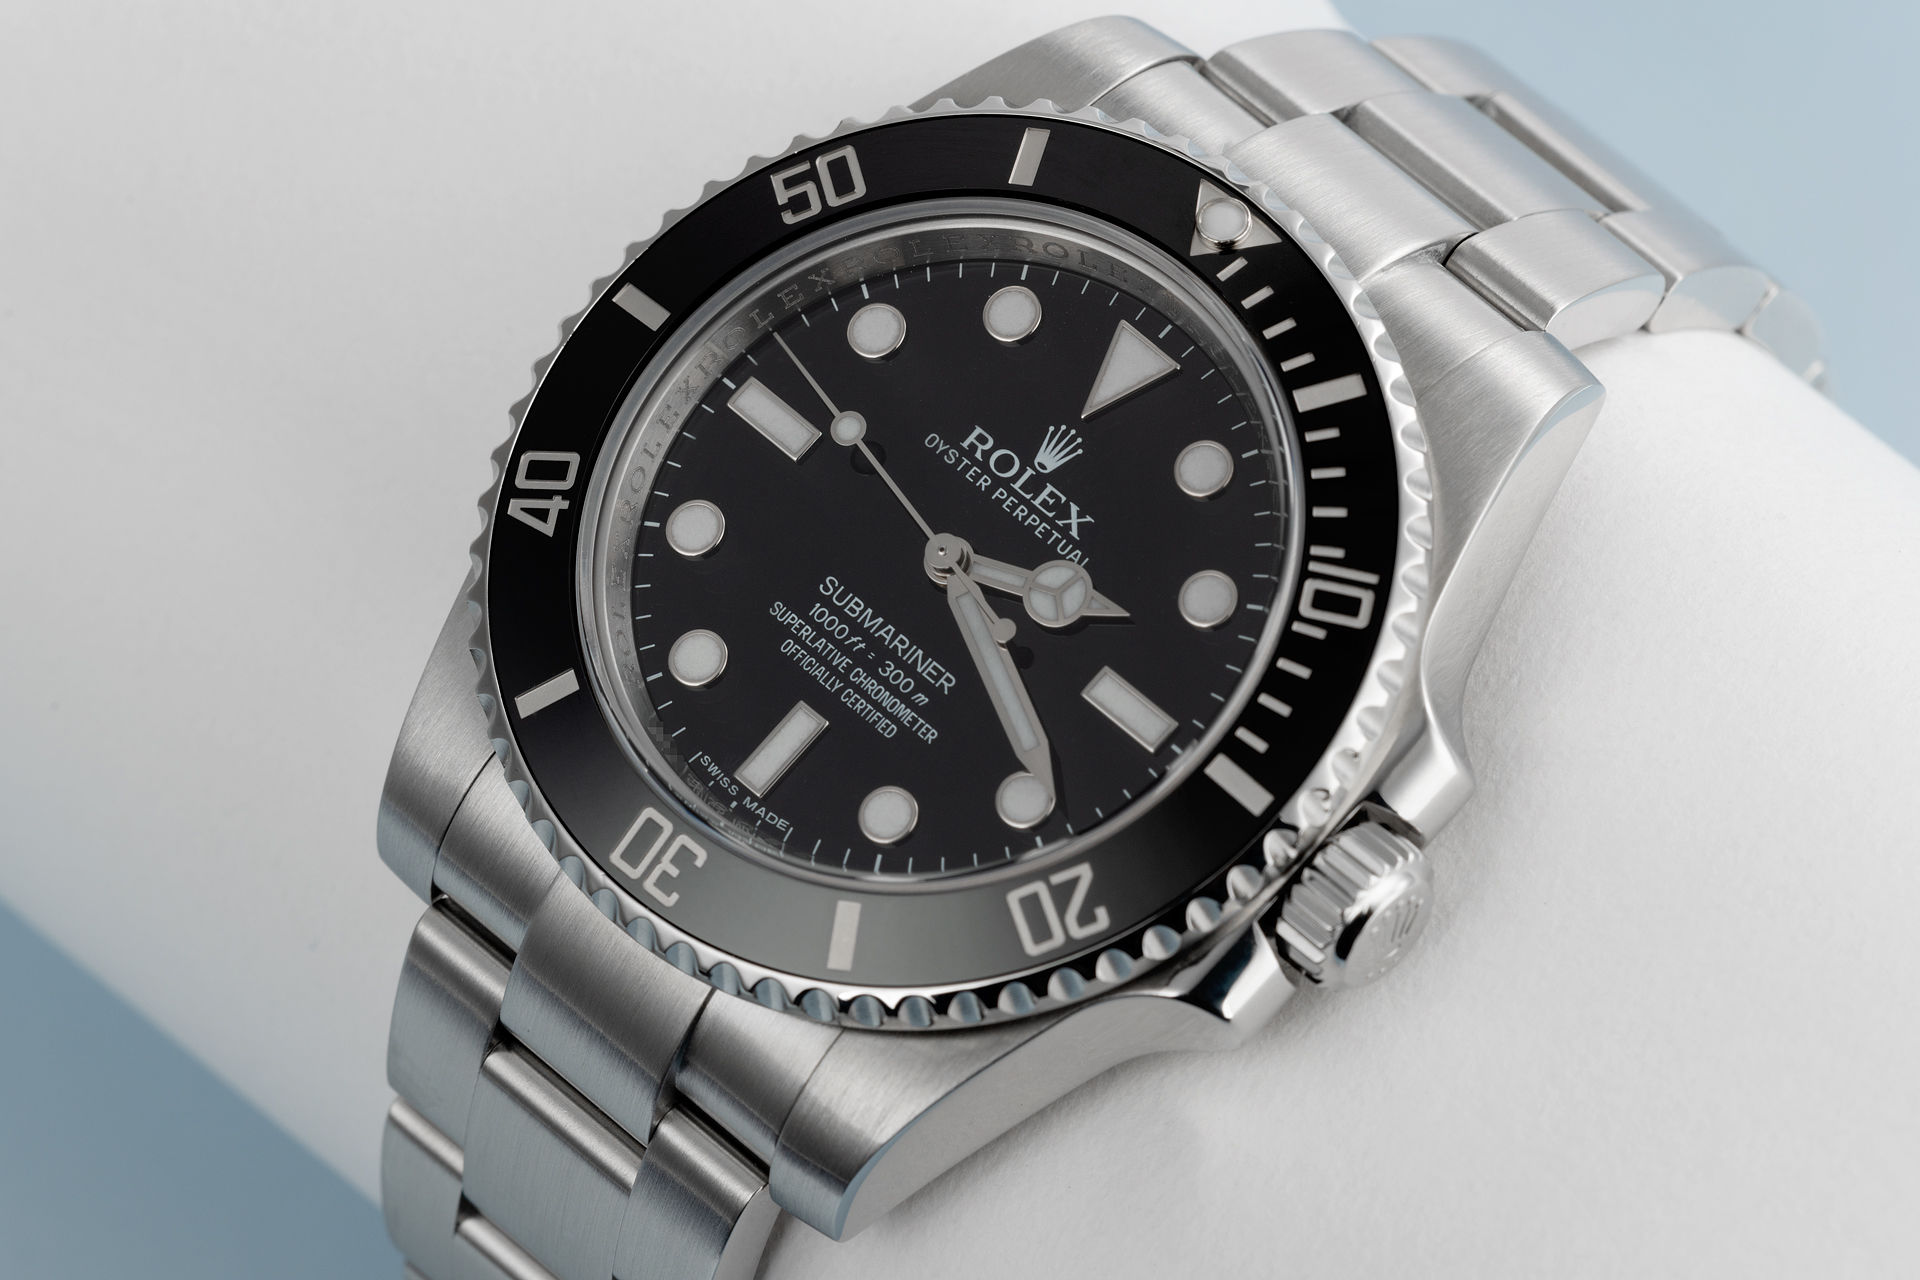 Latest Model "Box & Papers" | ref 114060 | Rolex Submariner 